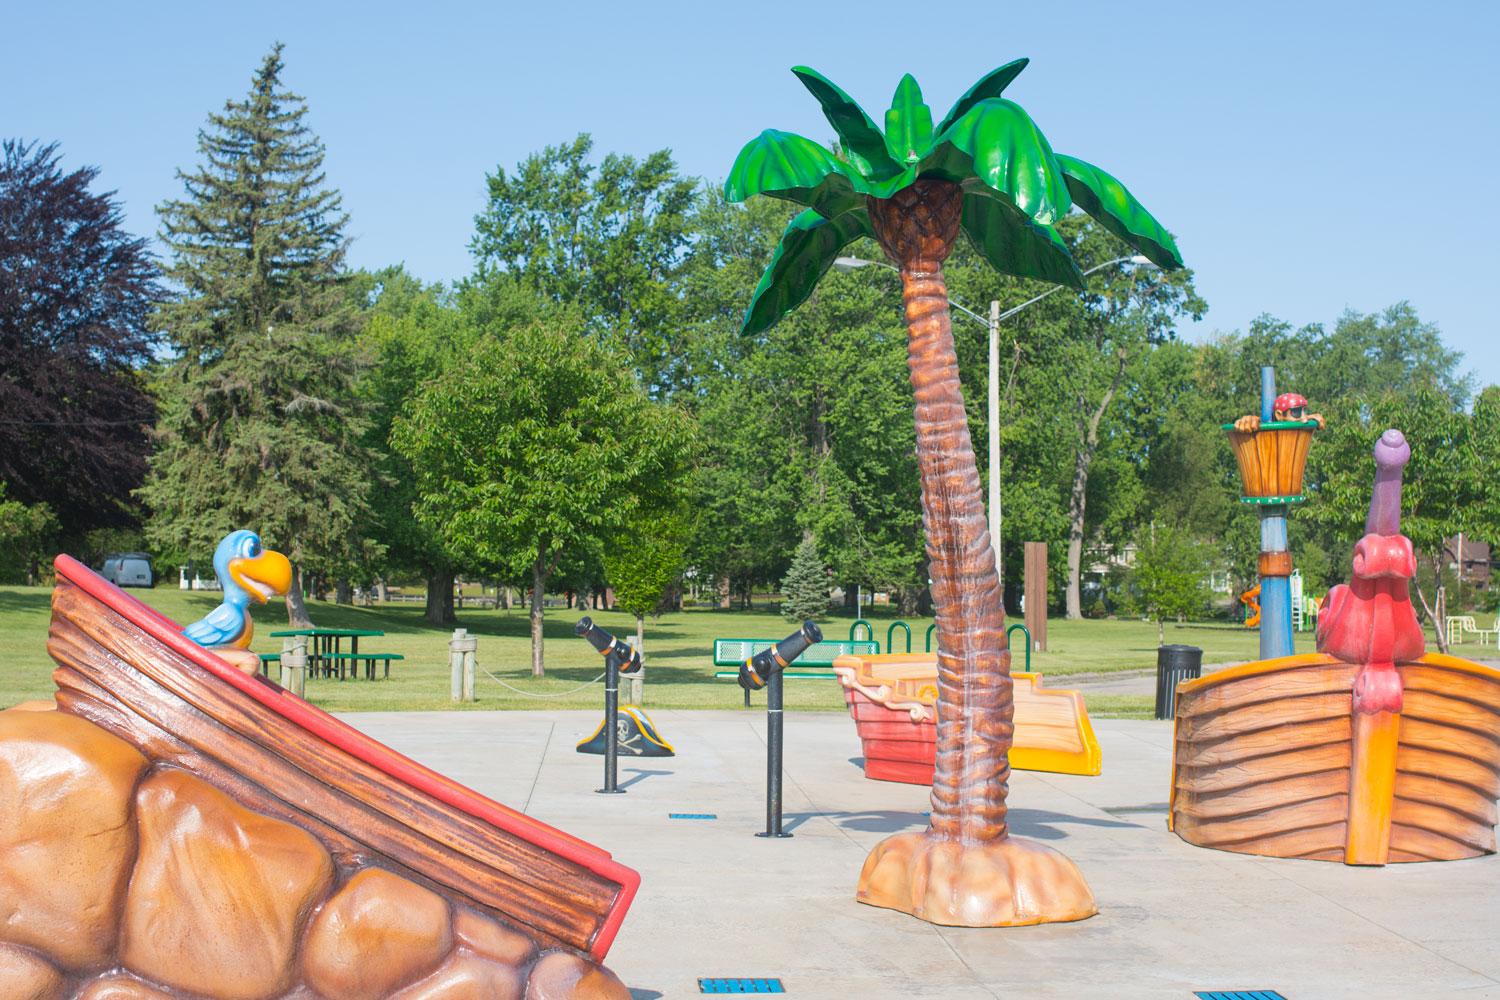 Splash Pad: Pirate theme with ships and cannons